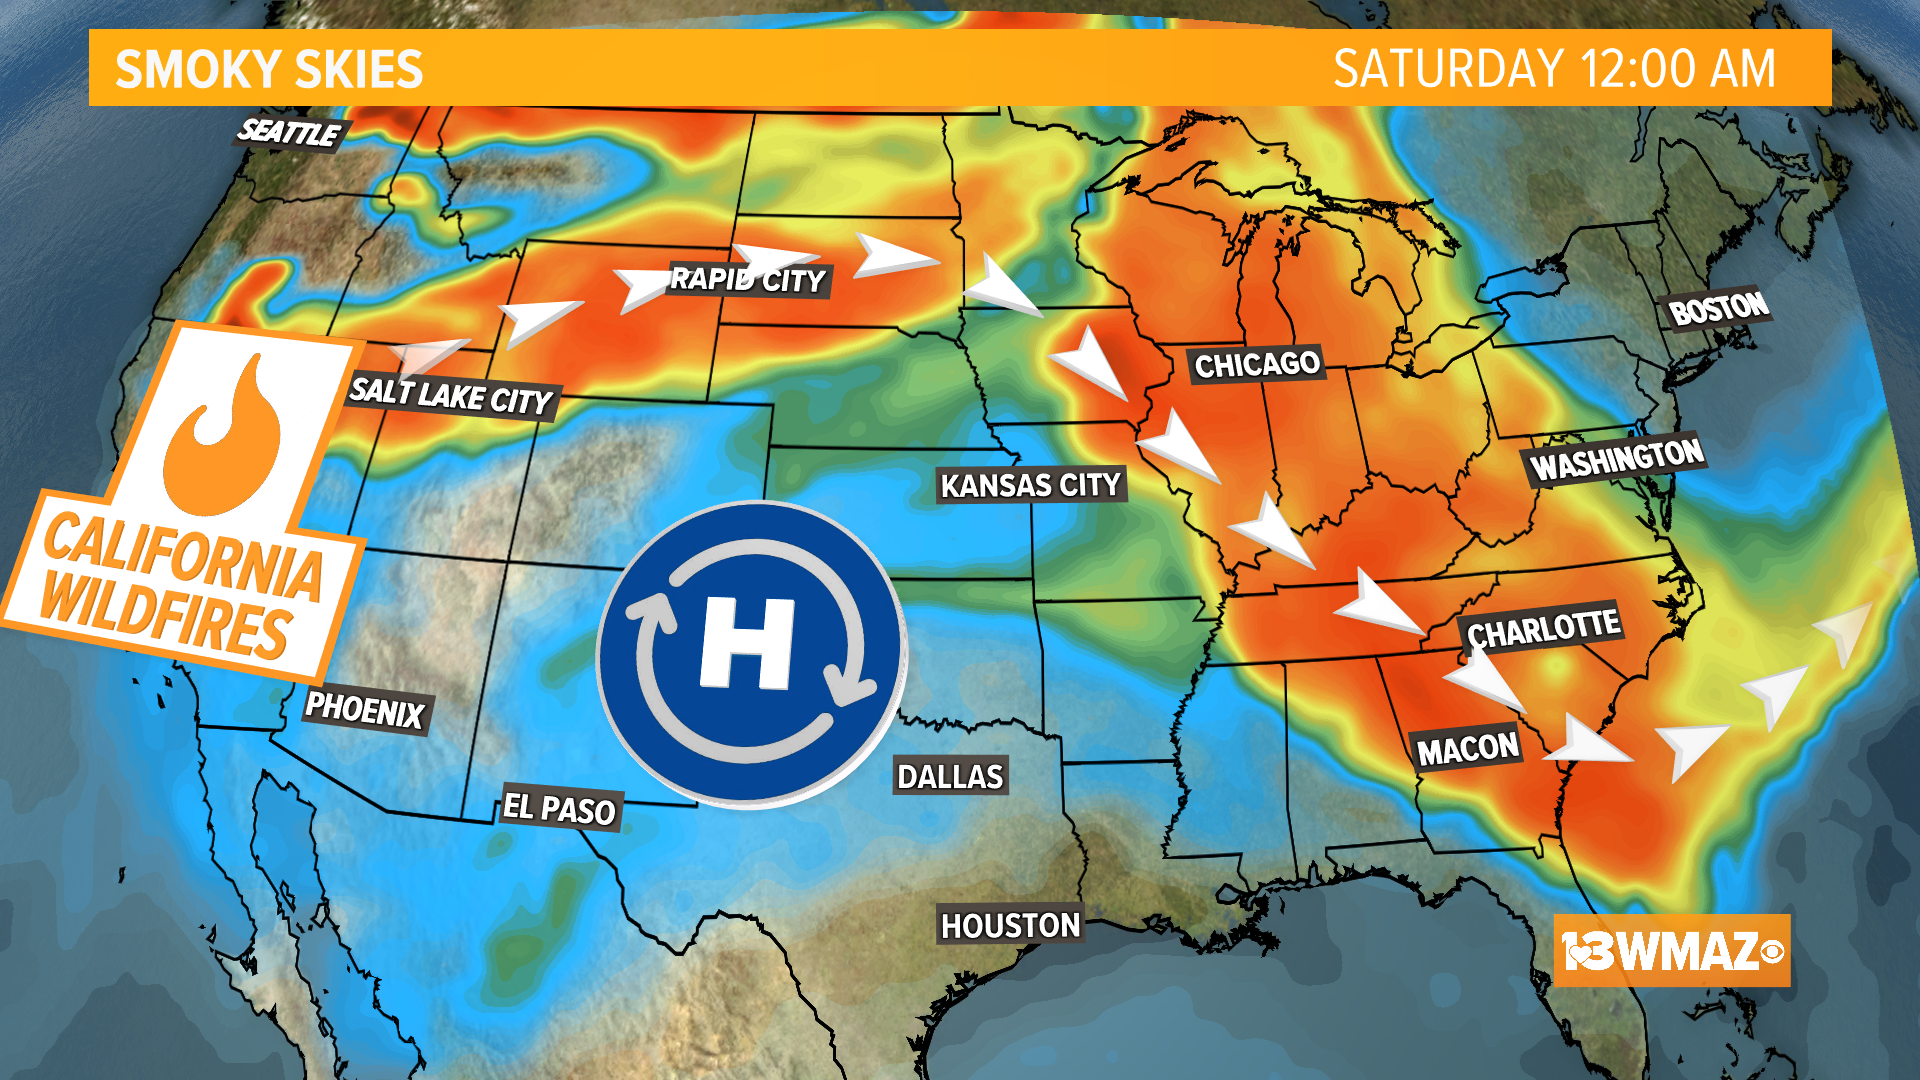 Smoke from the California wildfires is causing high pressure to form in the central US, which can result in smoke being seen in Central Georgia this weekend.